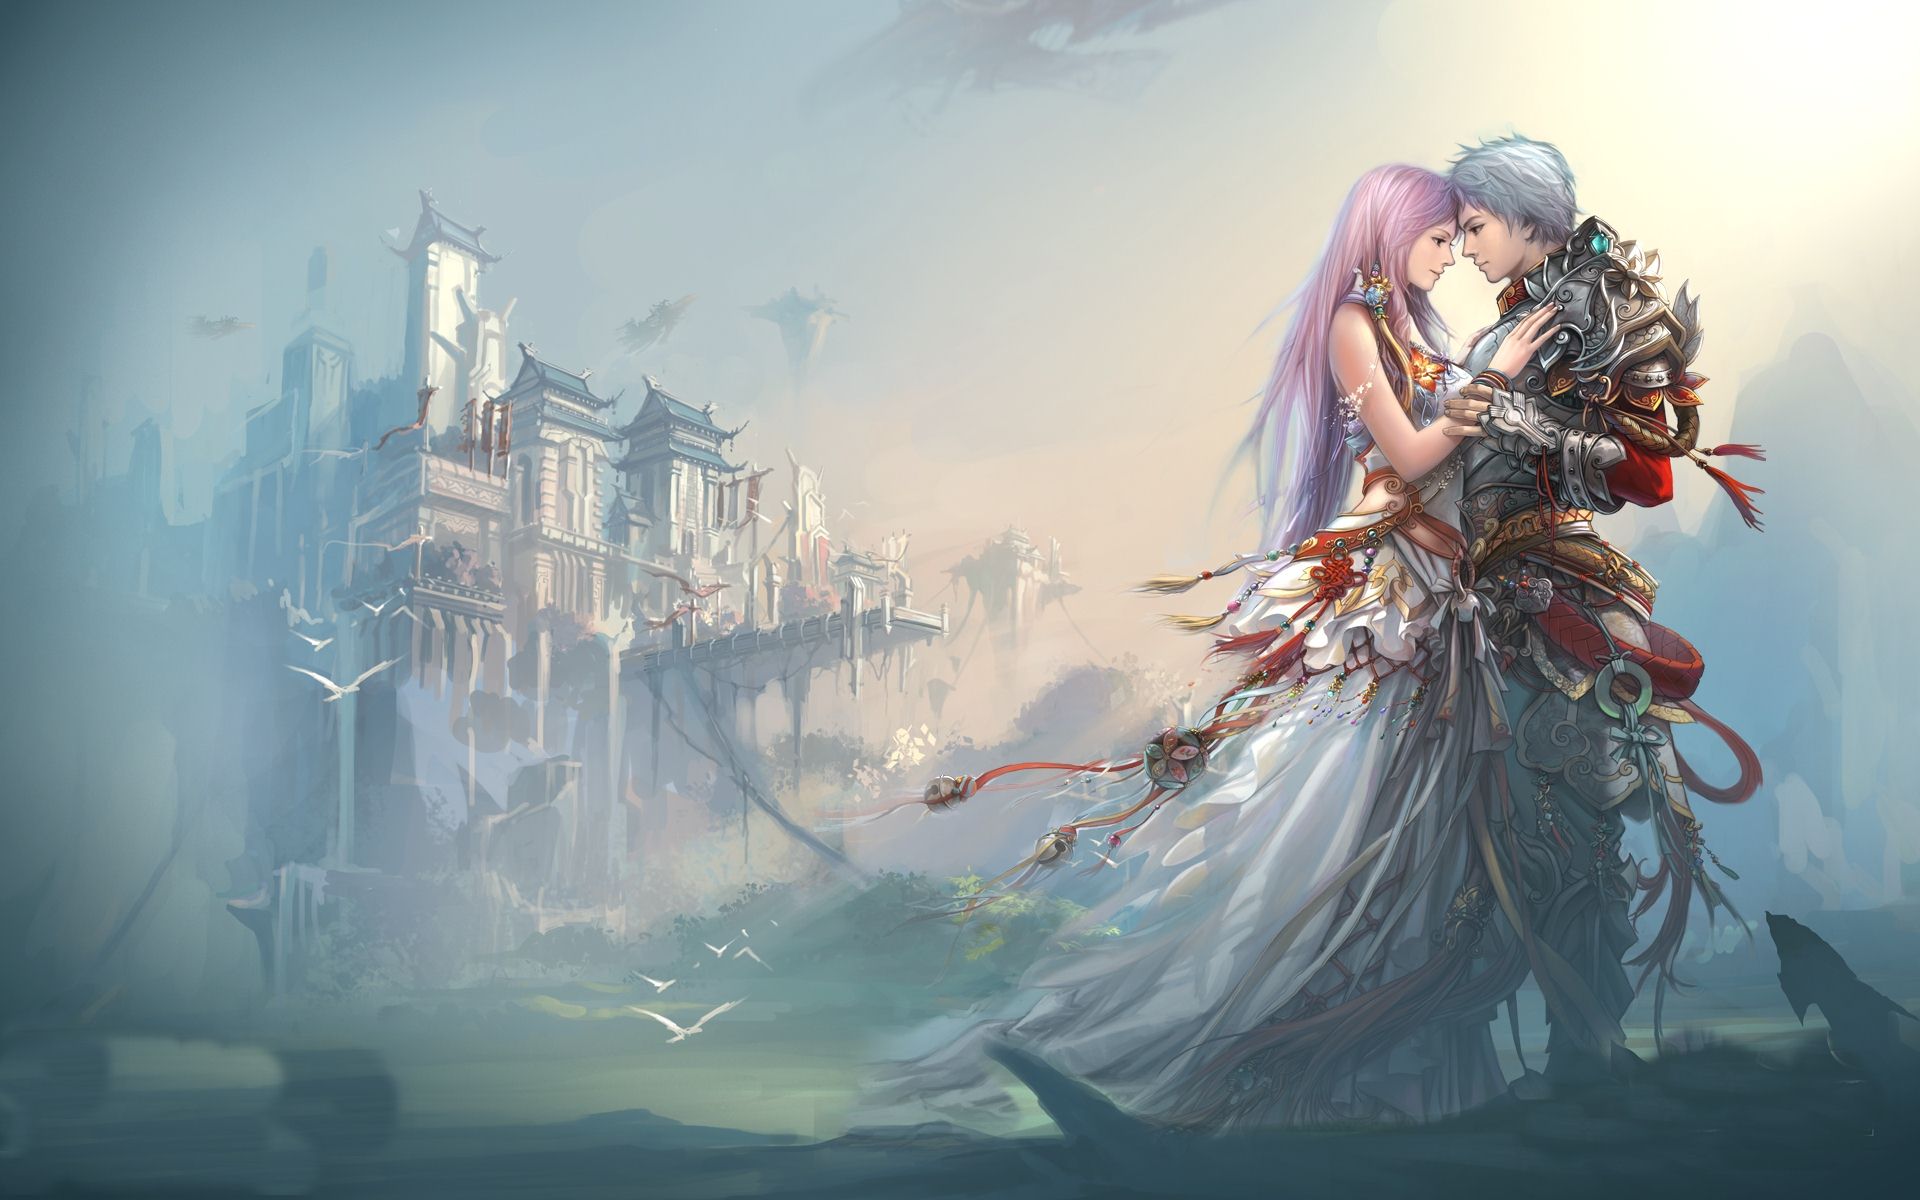 Free download Anime Love Wallpaper Hd For Desktop Mobile Anime Hd Wallpapers  For [1920x1200] for your Desktop, Mobile & Tablet | Explore 47+ Anime  Couple Wallpaper HD Website | Sweet Couple Anime